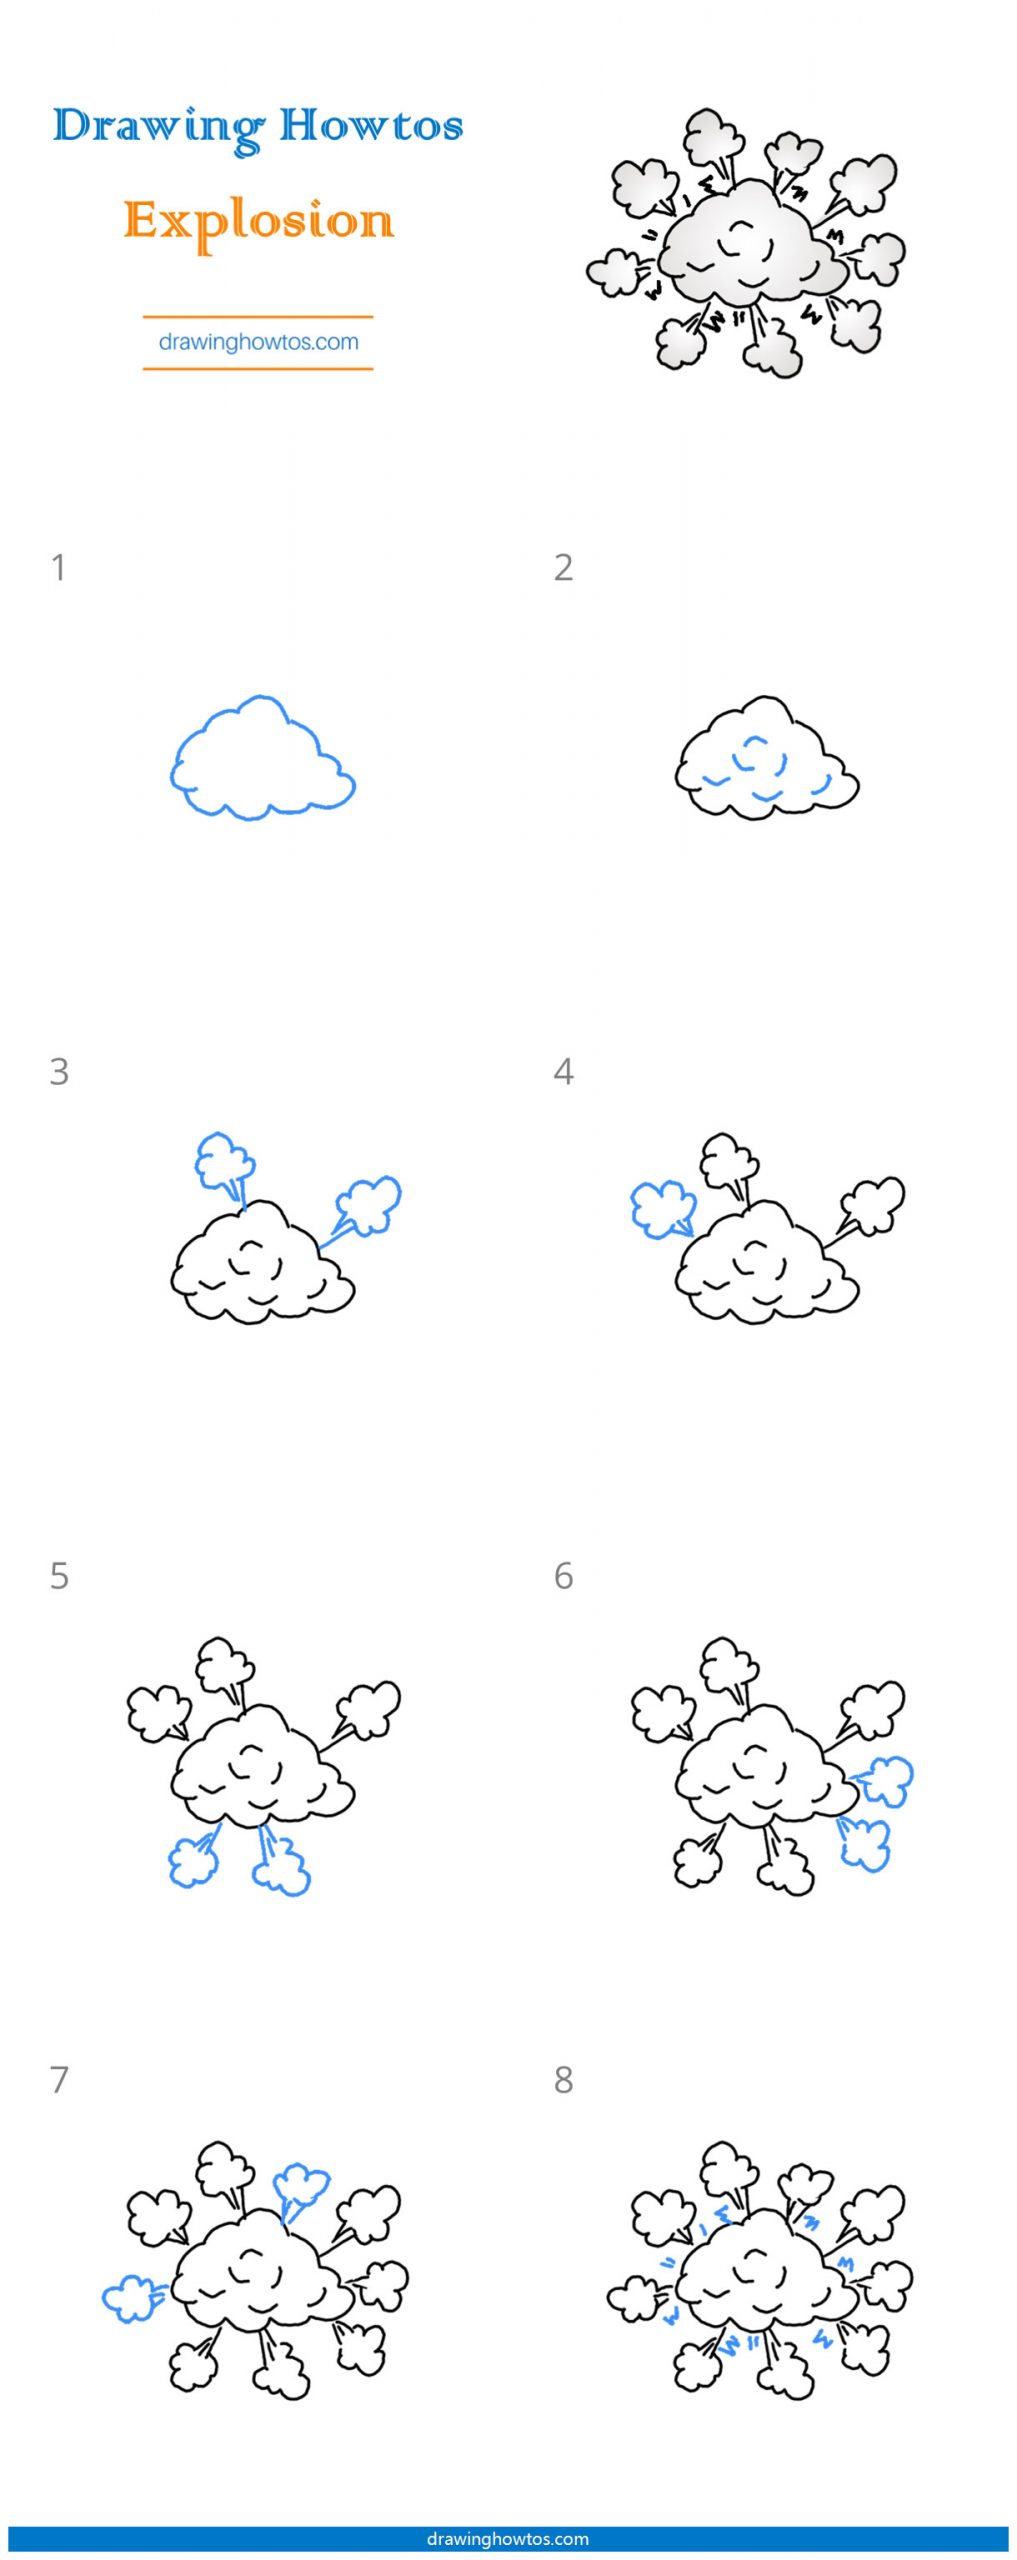 How to Draw an Explosion Step by Step